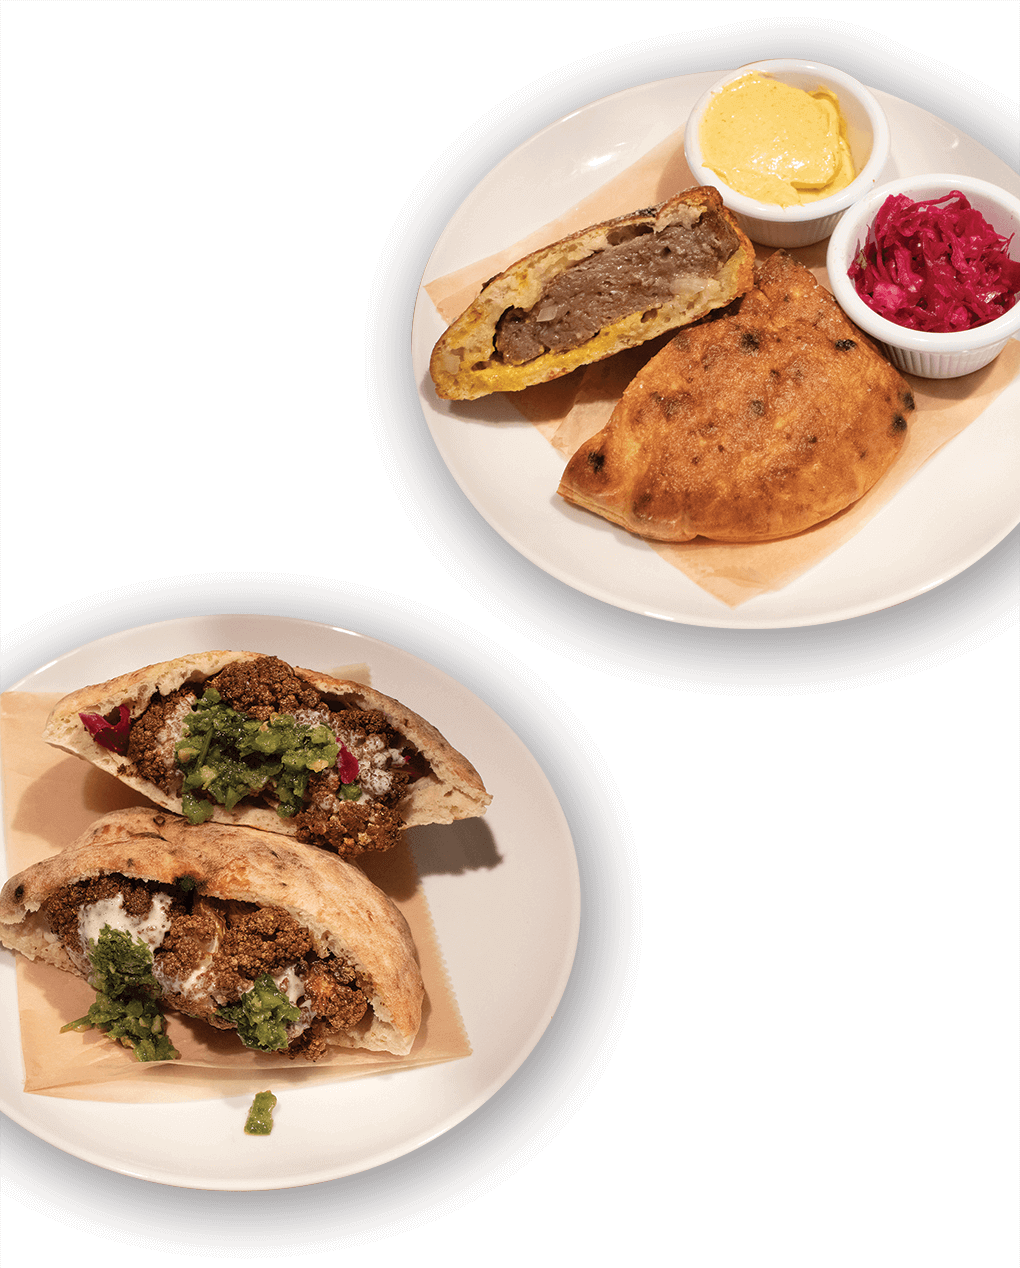 Sami & Susu offers a Lamb Arayes (left) served with amba aïoli and fermented red cabbage and a Cauliflower Pita (right) stuffed with creamy tahini, spicy green s’chug relish and fermented red cabbage